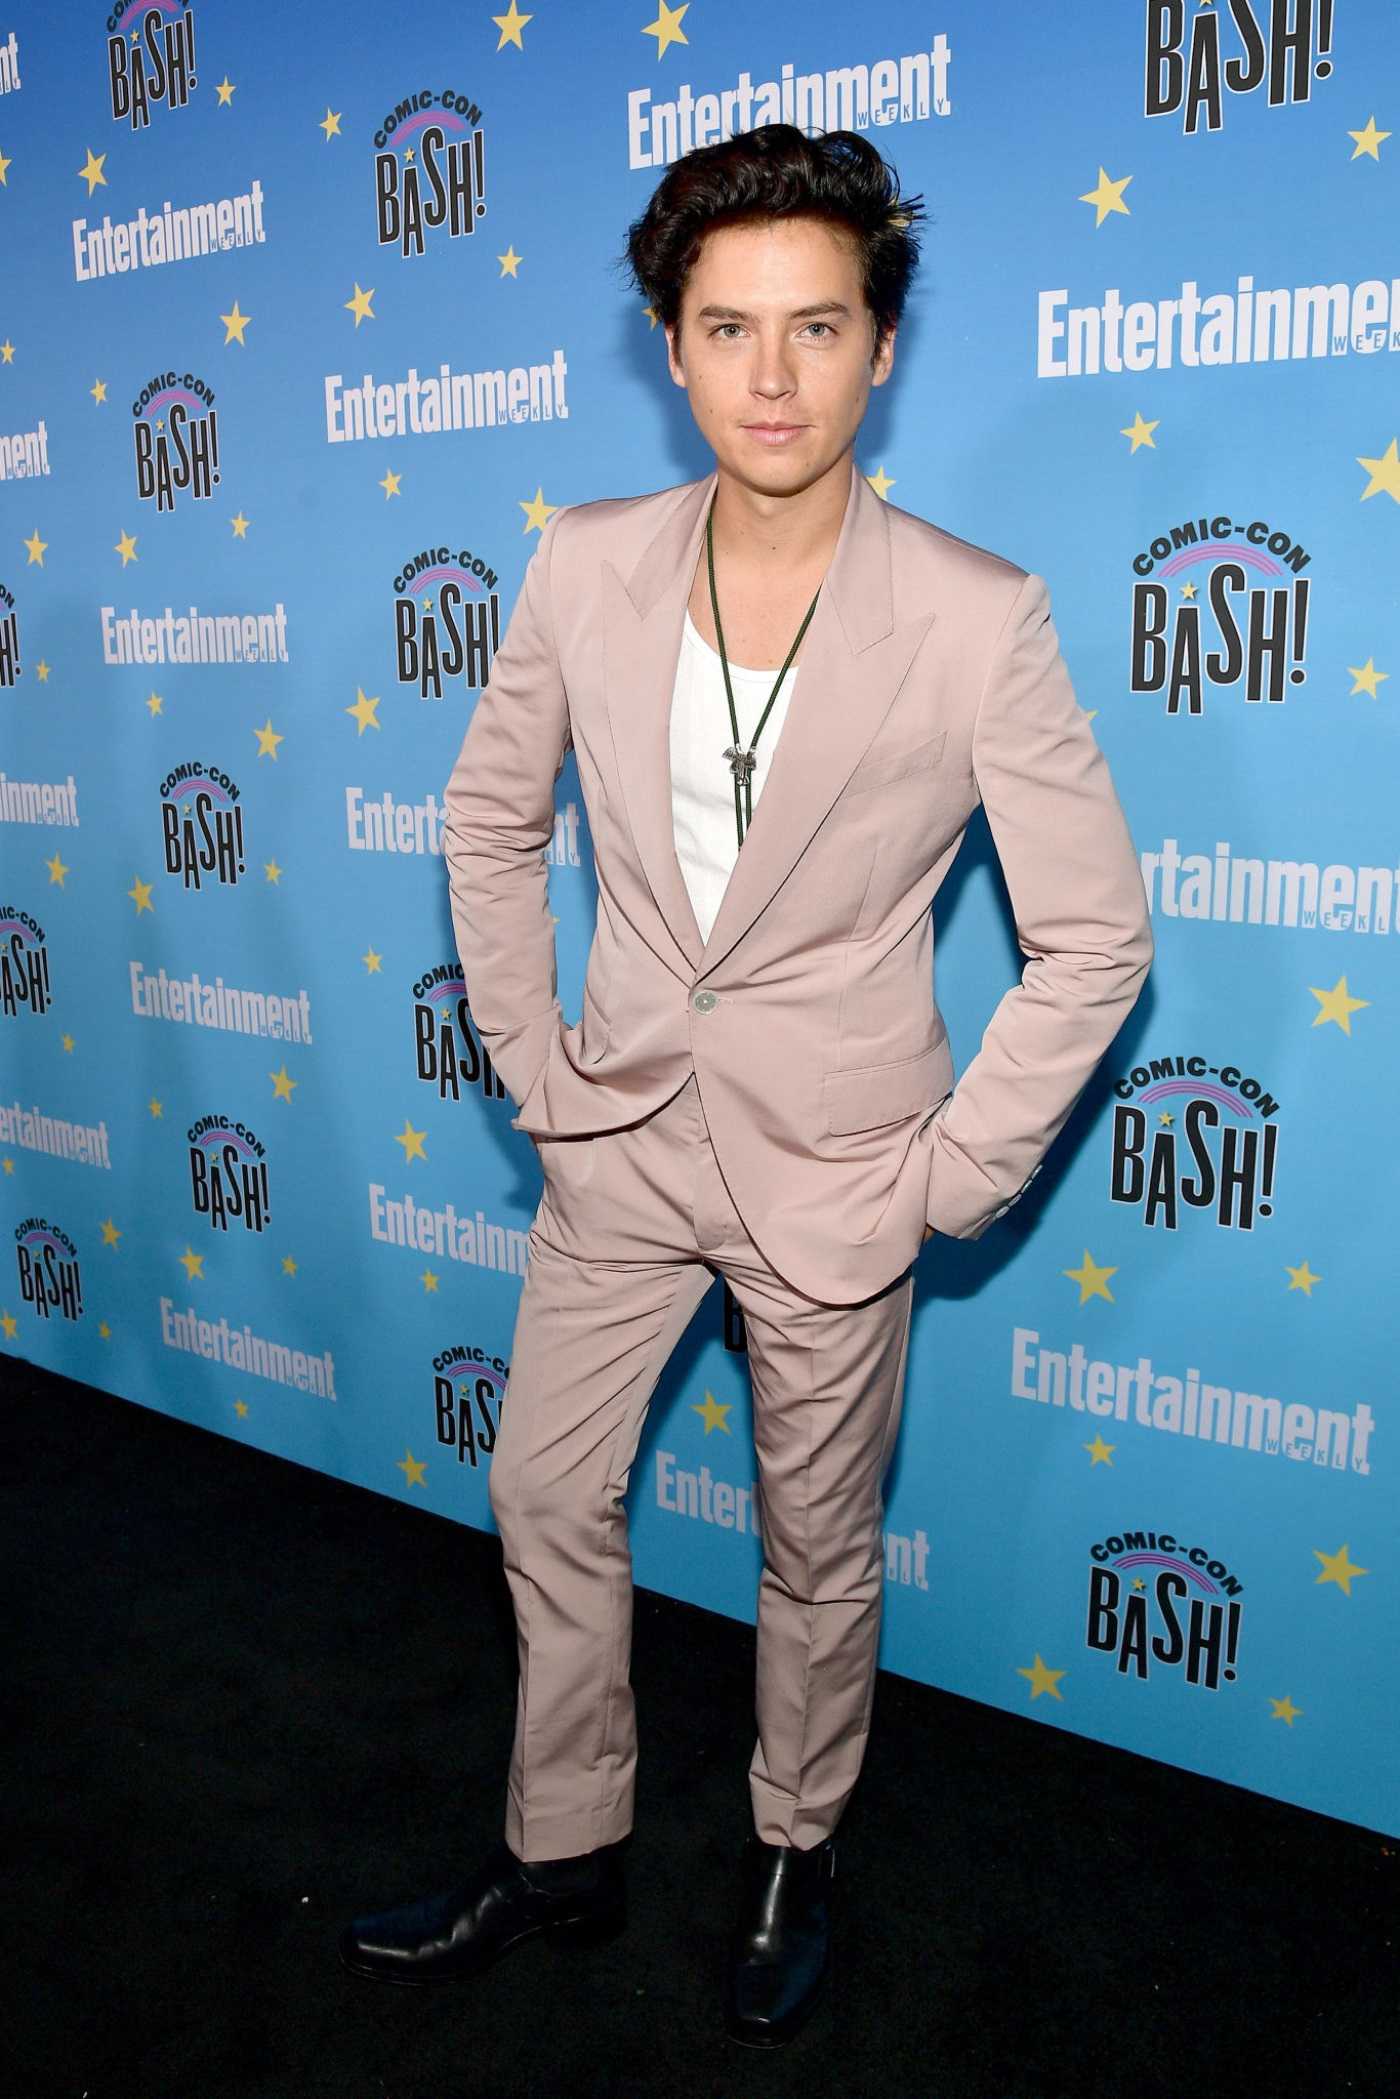 Cole Sprouse Attends Entertainment Weekly’s Comic-Con Bash in San Diego 07/20/2019